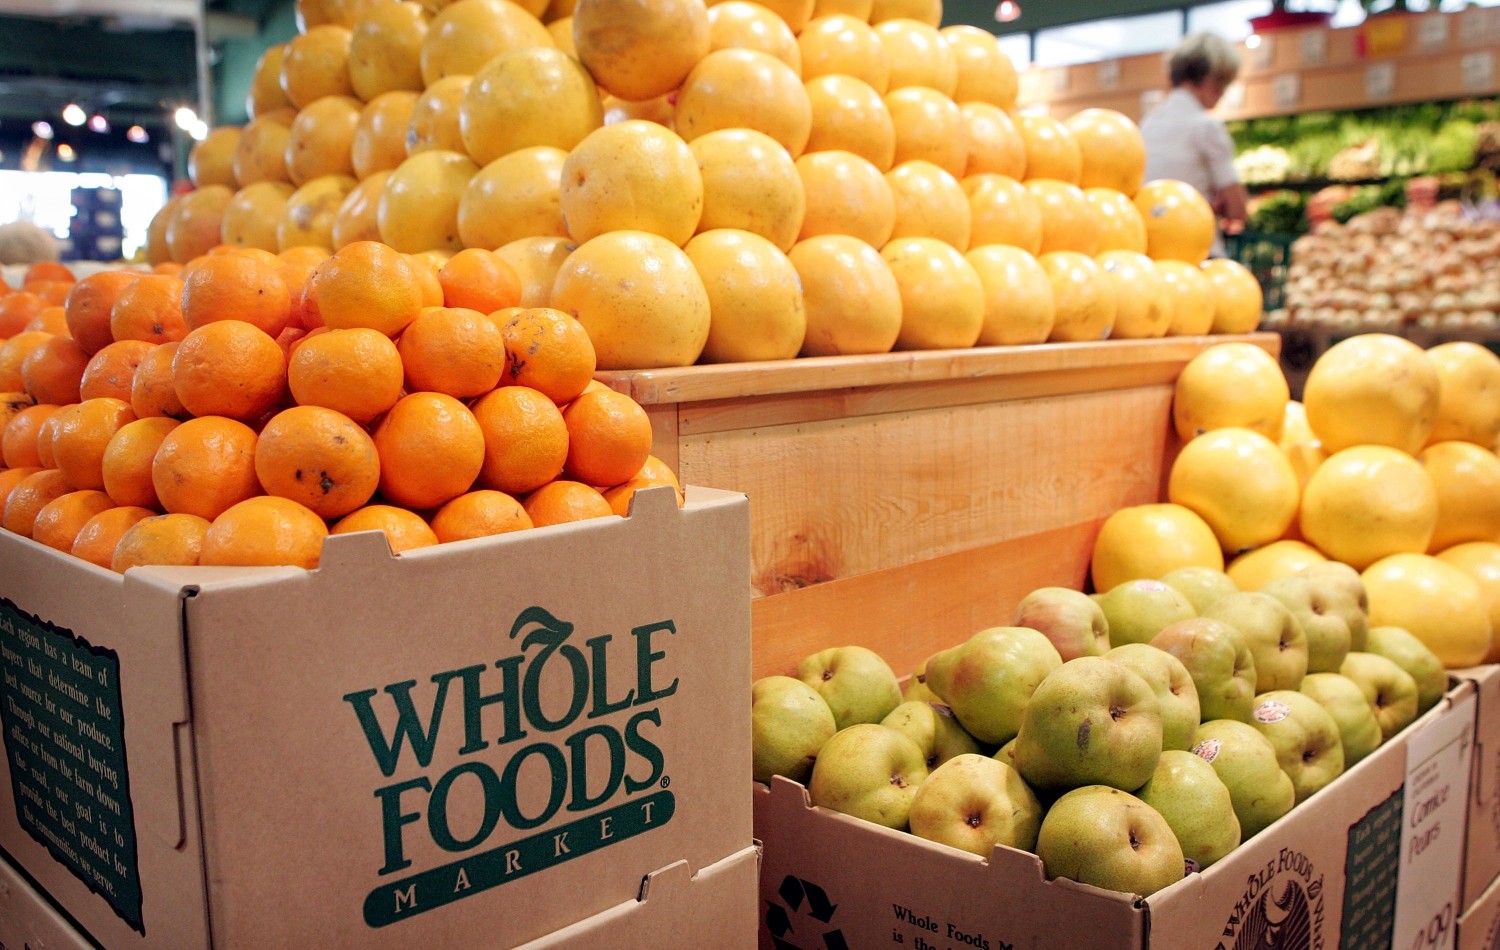 Whole Foods Reports 27 Percent Increase In Q2 Earnings